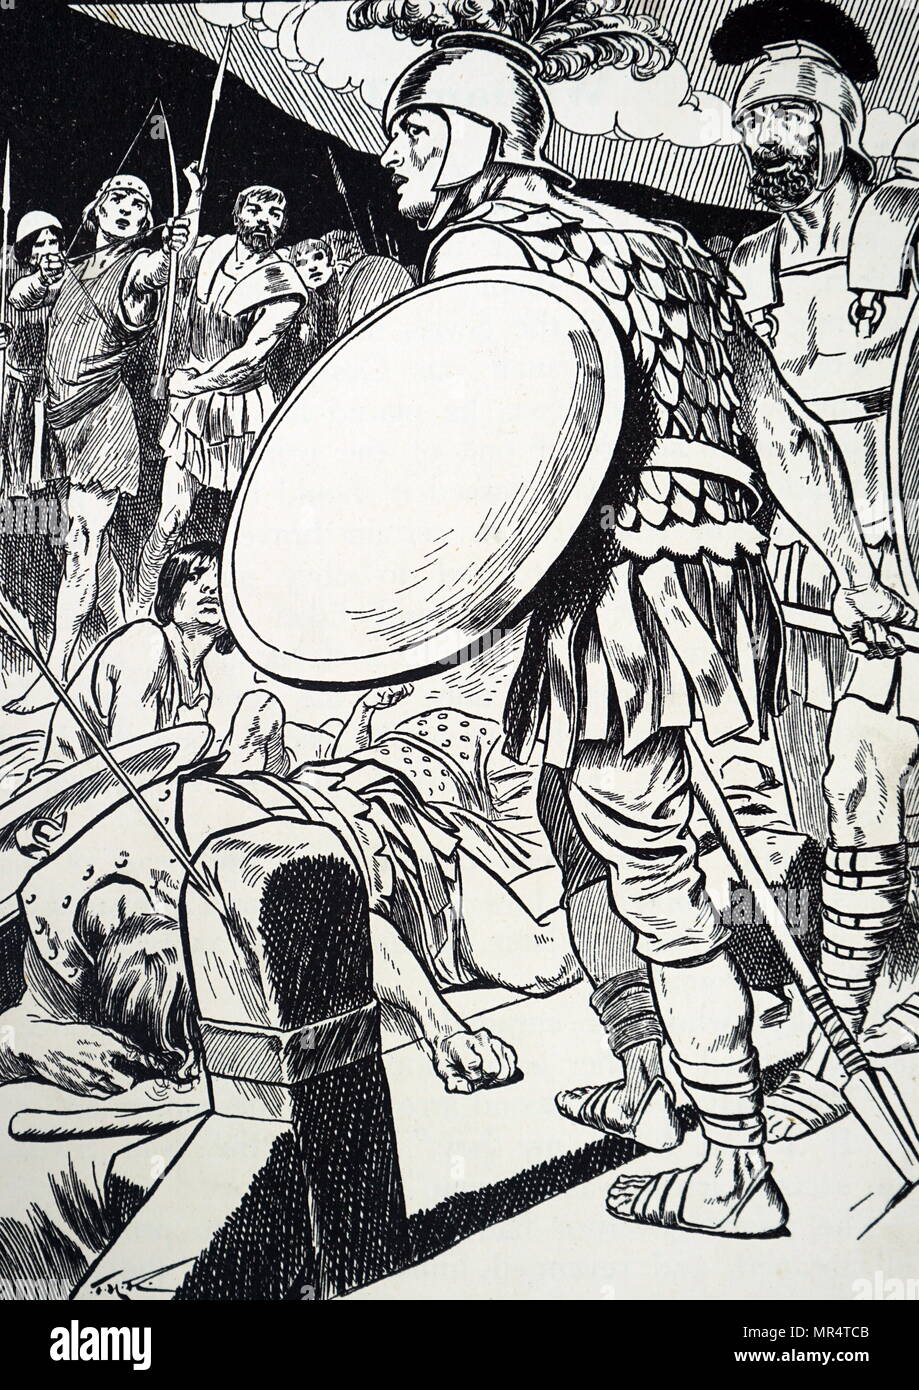 Illustration depicting Horatius Cocles holding the bridge over the Tiber into Rome against Lars Porsena's army. Horatius Cocles (530-500 BC) an officer in the army of the ancient Roman Republic who famously defended the Pons Sublicius from the invading army of Lars Porsena, King of Clusium in the late 6th century BC. Dated 20th century Stock Photo